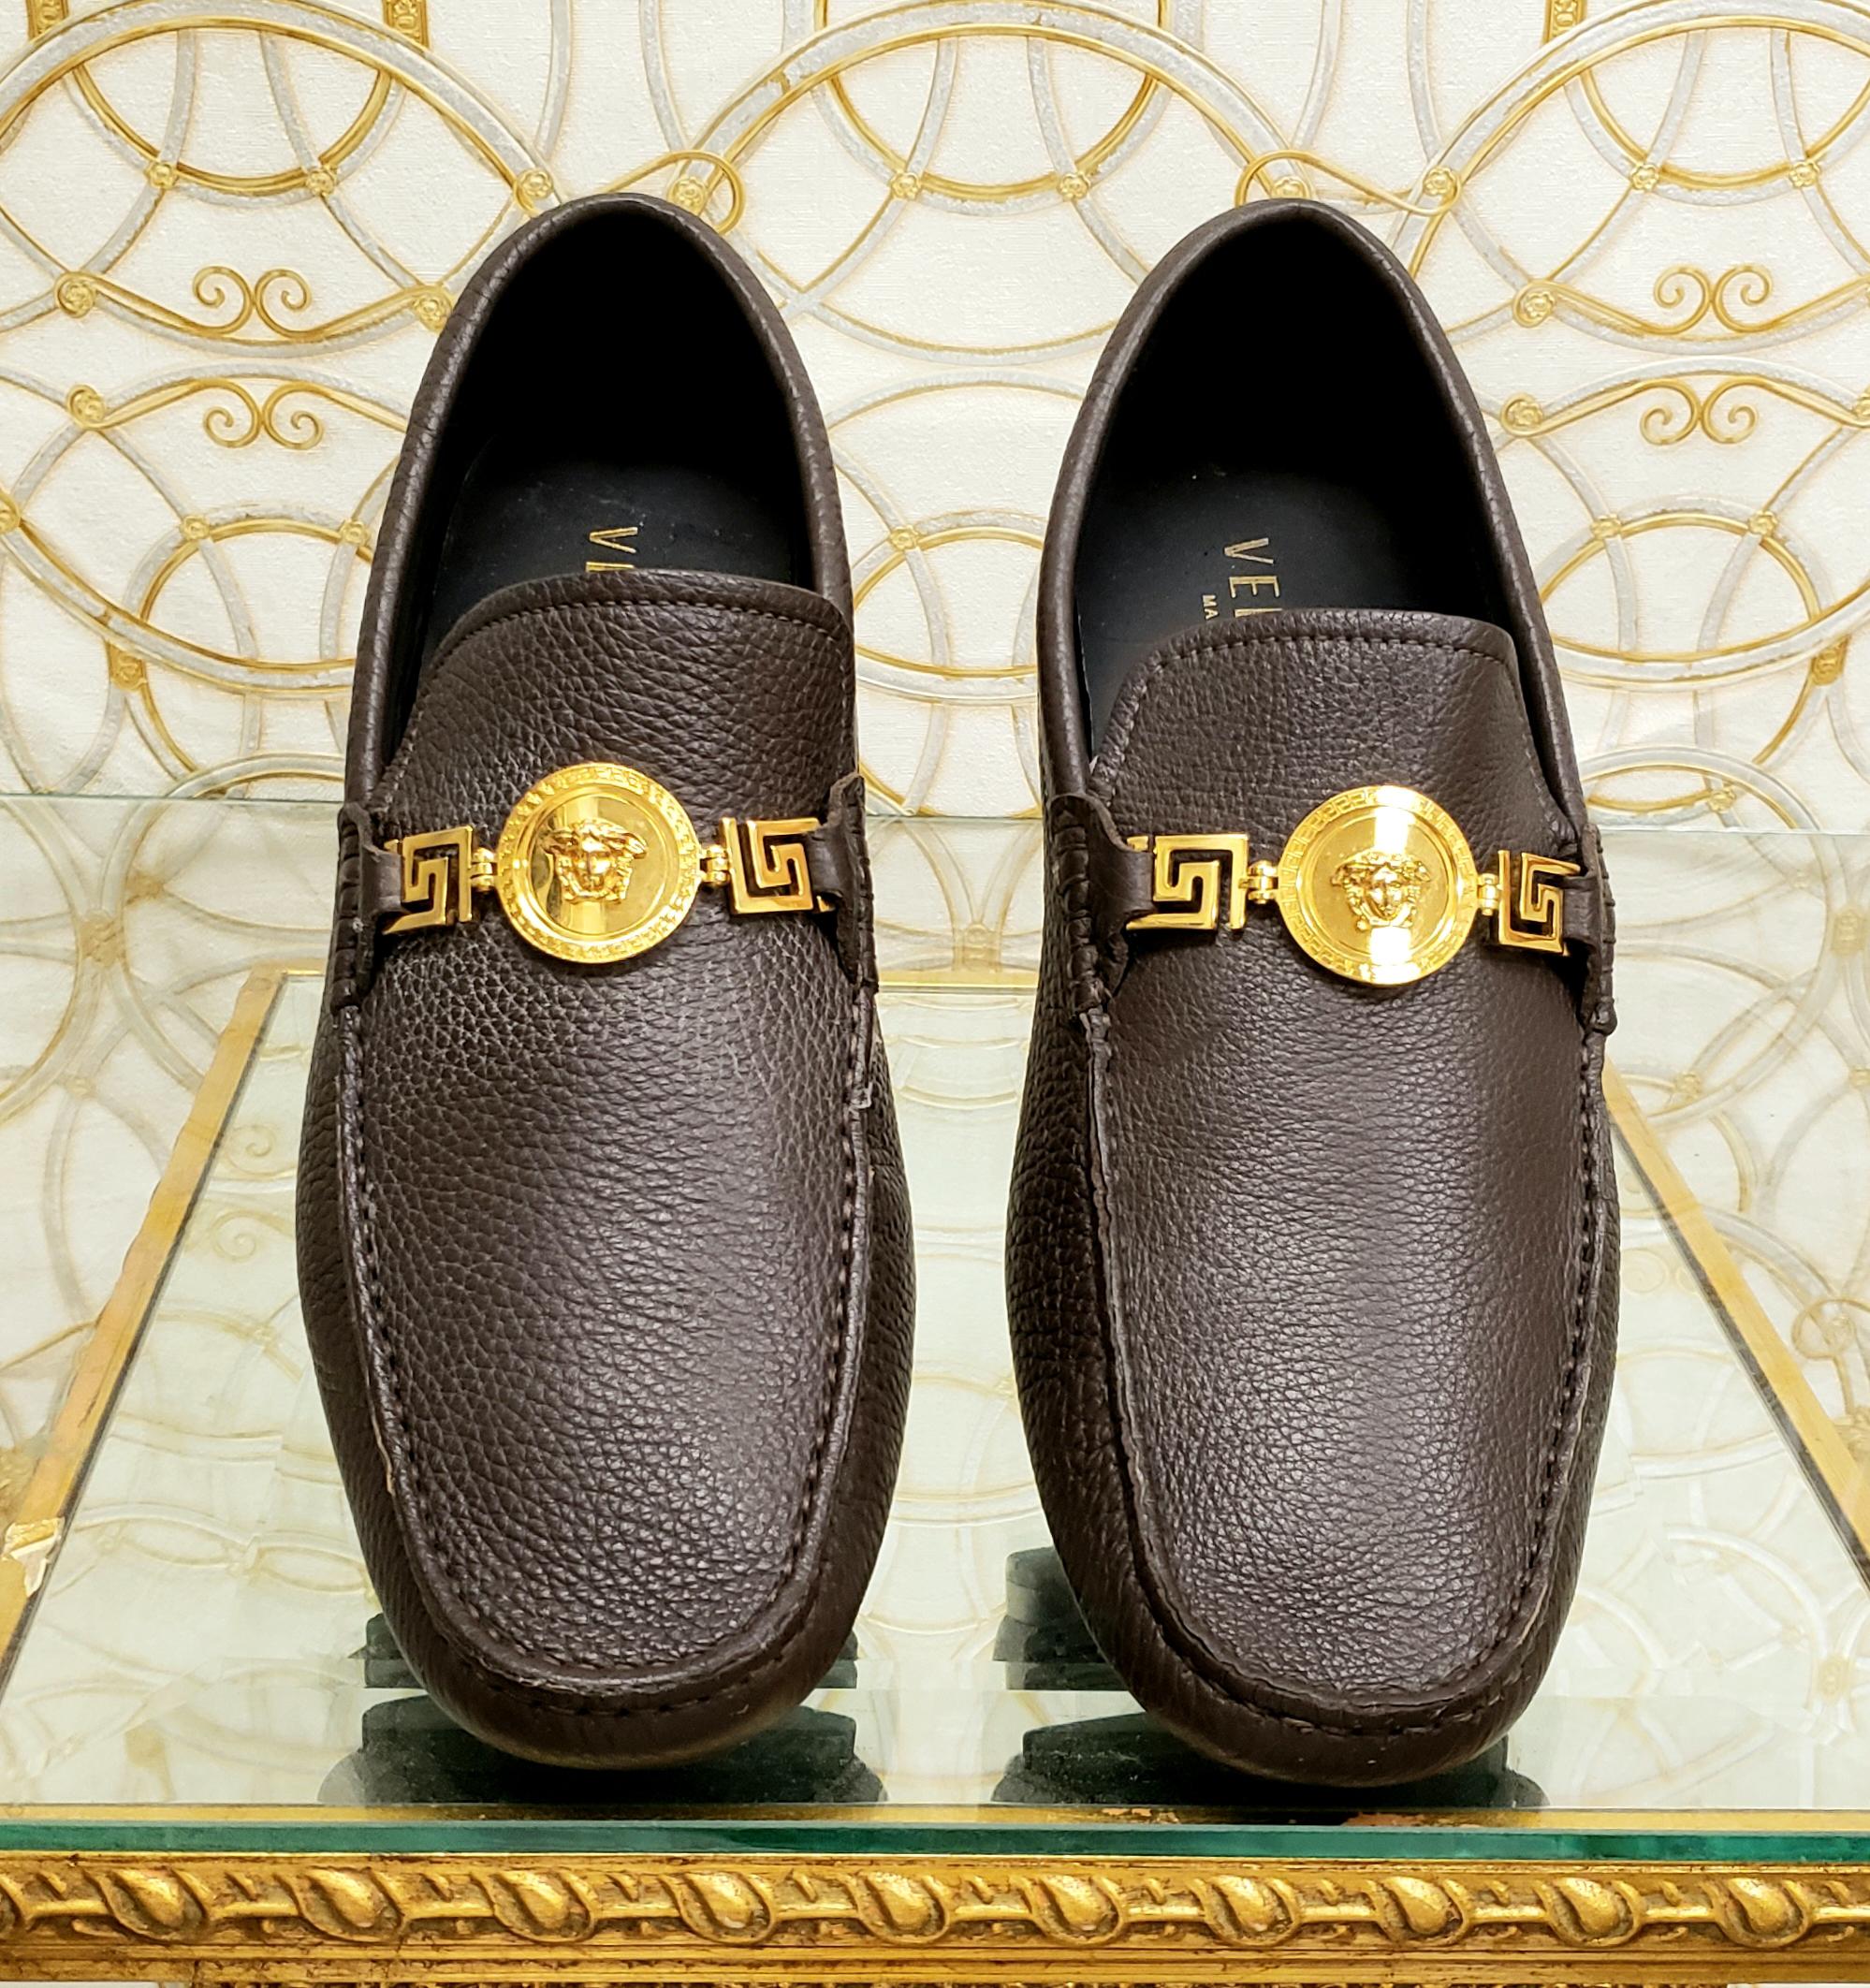 Black VERSACE BROWN LEATHER LOAFER SHOES w/MEDUSA MEDALLION as seen in movie Sz 9.5 For Sale